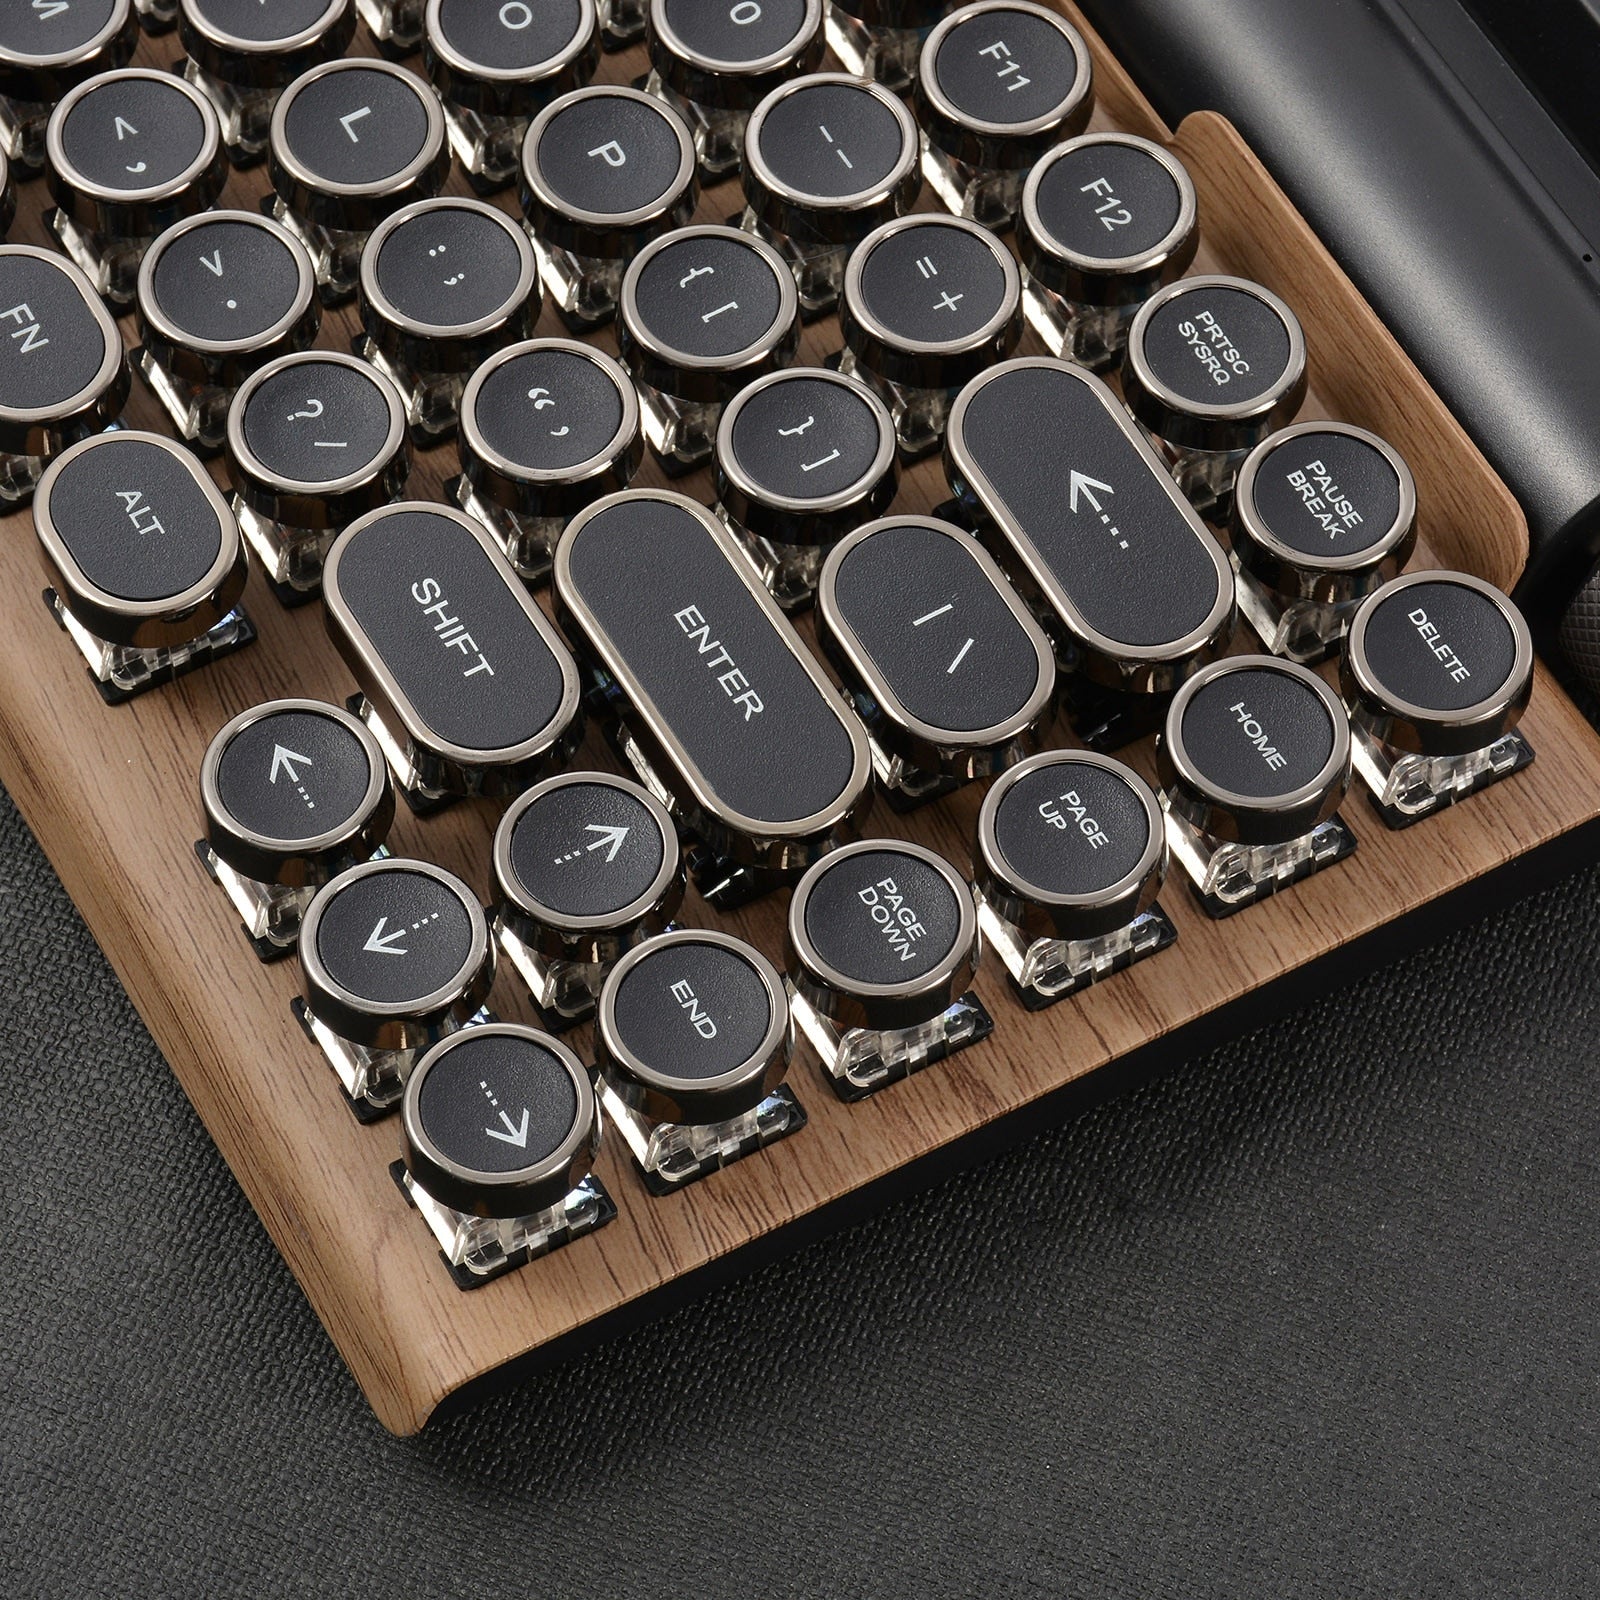 Retro Typewriter Keyboard with Basic Features Water-resistant